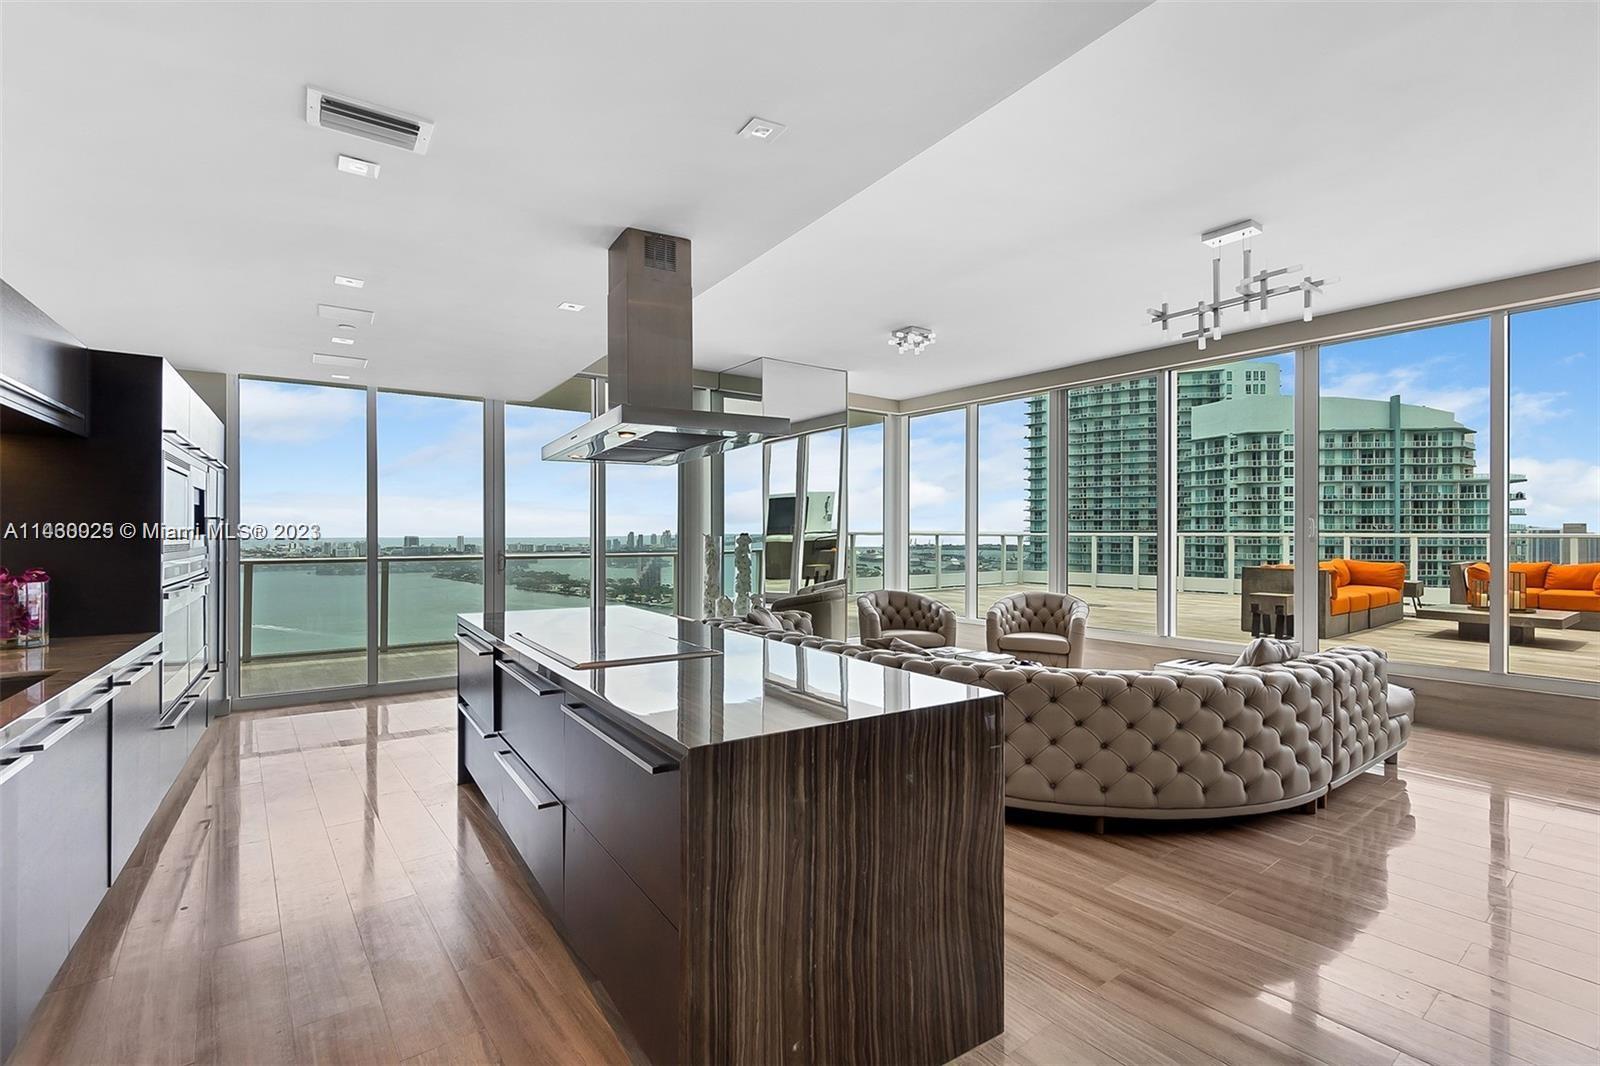 An absolute one of a kind designer Penthouse perched over Biscayne bay with sweeping 270 degree views from the Miami Beach shoreline to the downtown skyline; from Coconut Grove to the Hard Rock. In a world of cookie cutter Miami apartments, this glass jewel box stands alone. With 2,700 sqft of interior space and over 2,500 sqft of sprawling terrace directly off your great room, it is a unicorn that will never be repeated. Imagine the beauty of opening your glass sliders to an immense outdoor living space replete with a jucuzzi hot tub and outdoor kitchen. A home in the sky filled with designer finishes, a spectacular glass primary bath, oversized walk in closets and a gorgeous chefs kitchen and entertainment island. It's one of those spaces that must be experienced in person to be believed